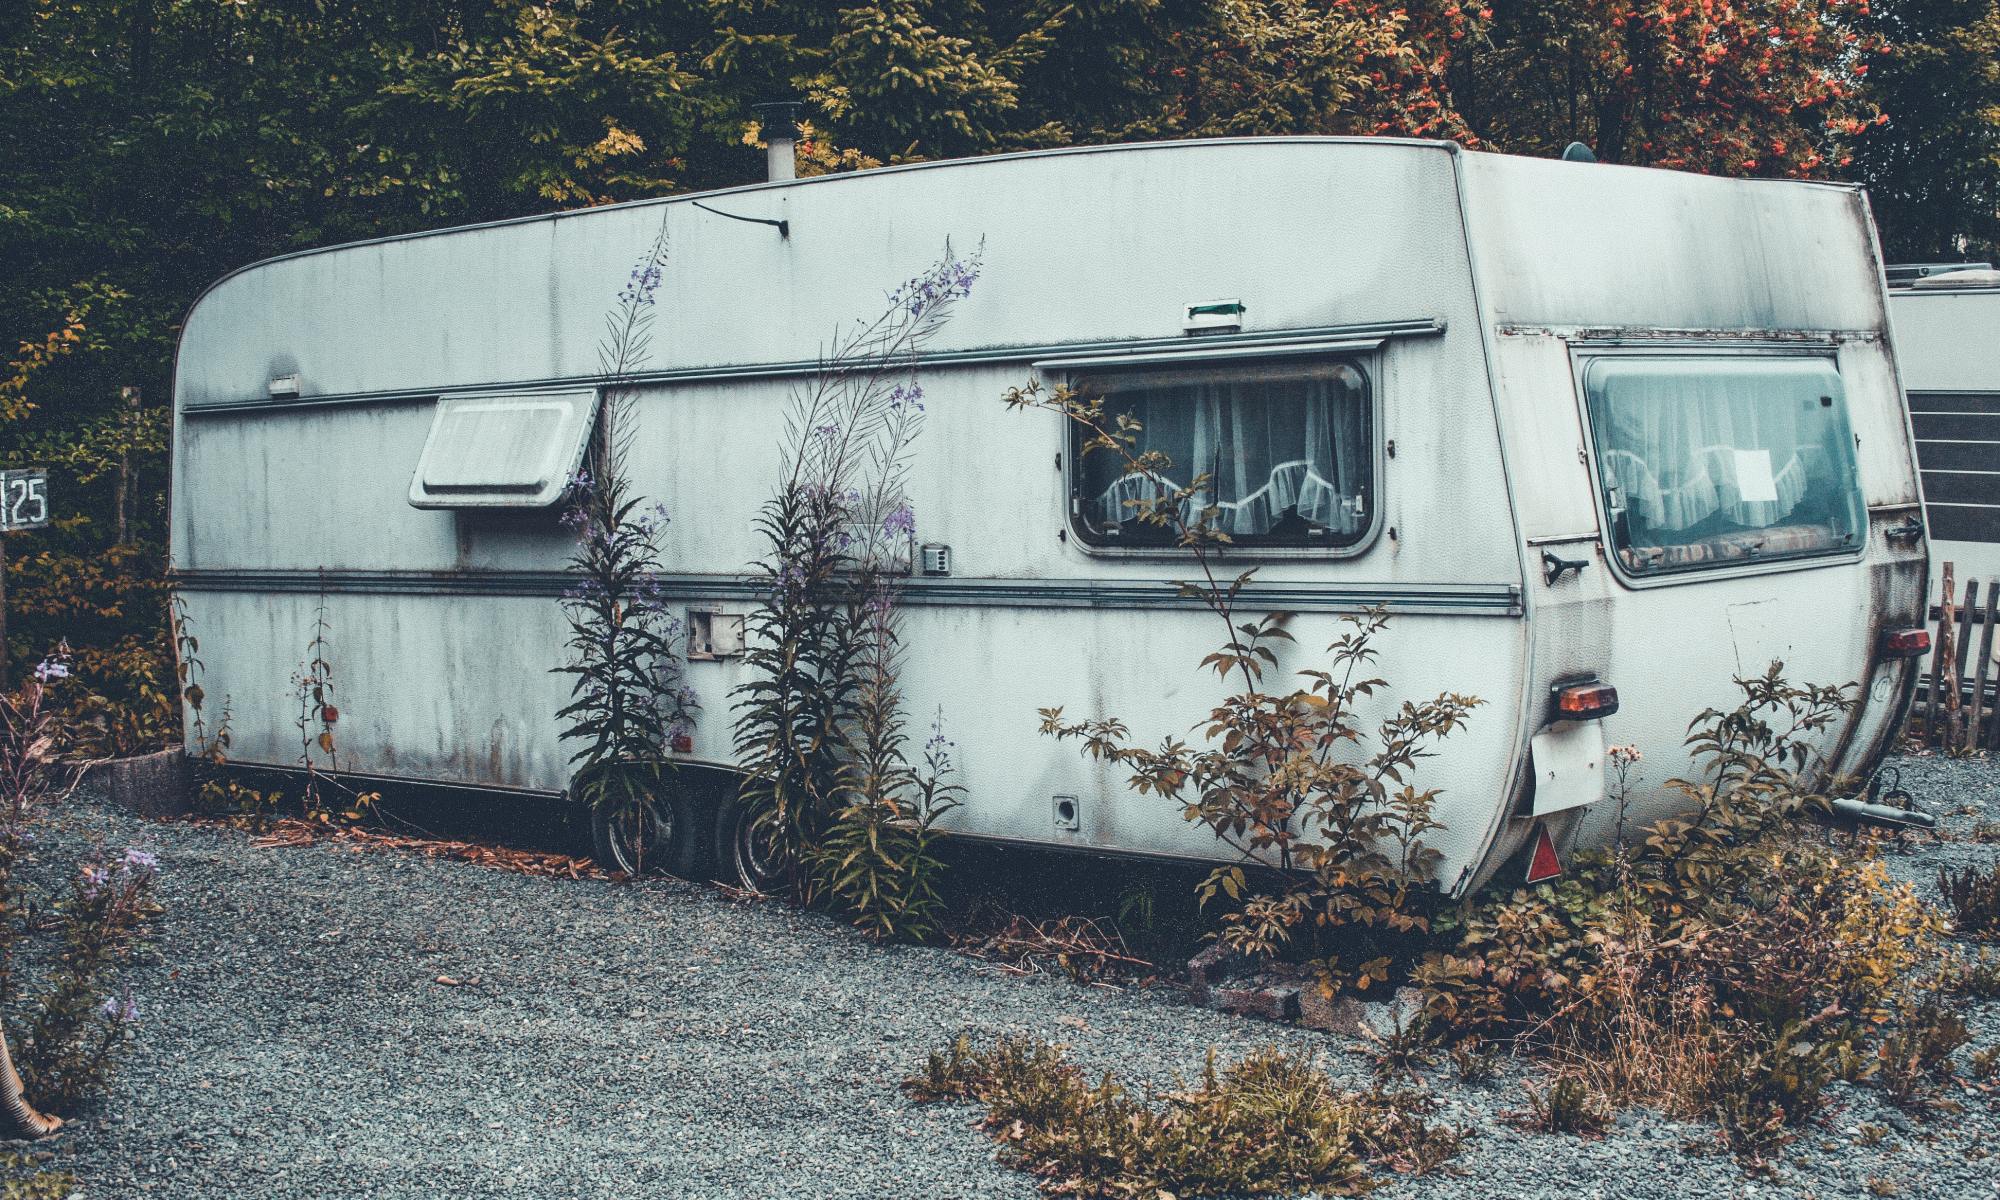 Photo of an old and weathered caravan by Markus Spiske found on Unsplashed.com